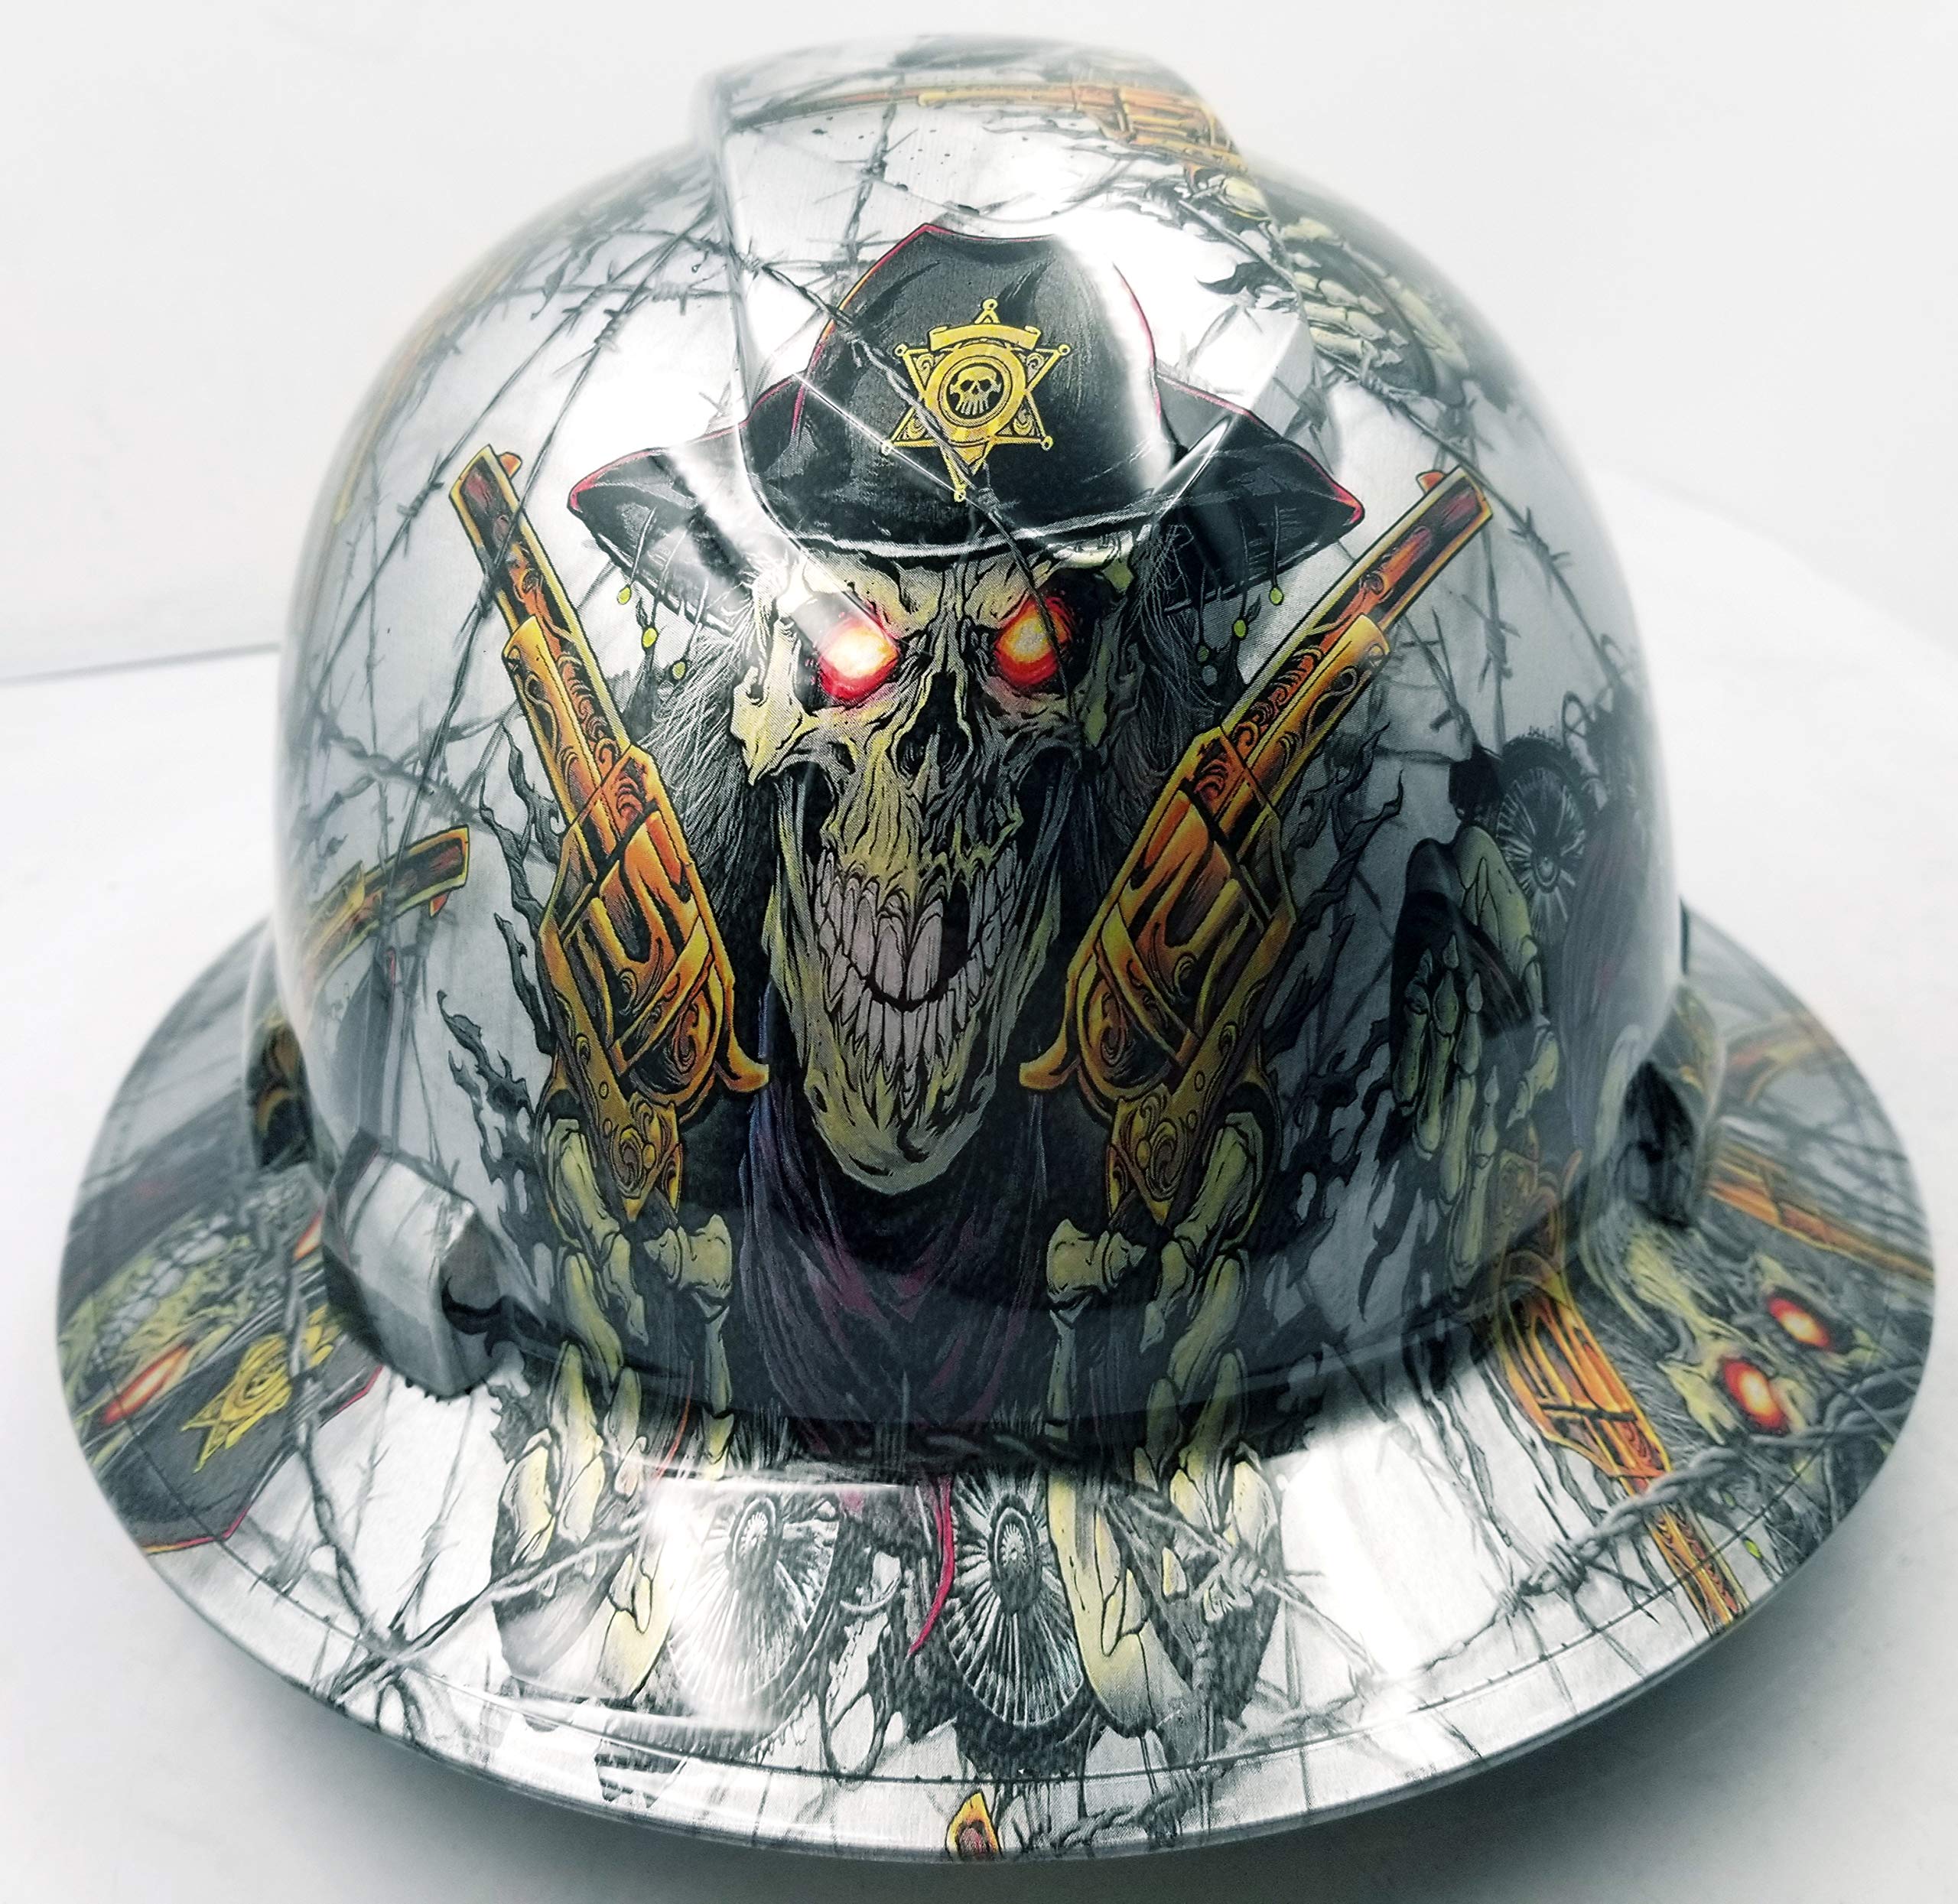 Wet Works Imaging Customized Pyramex Full Brim DIRTY DIRTY HARRY HARD HAT with Ratcheting Suspension CUSTOM LIDS CRAZY SICK CONSTRUCTION PPE